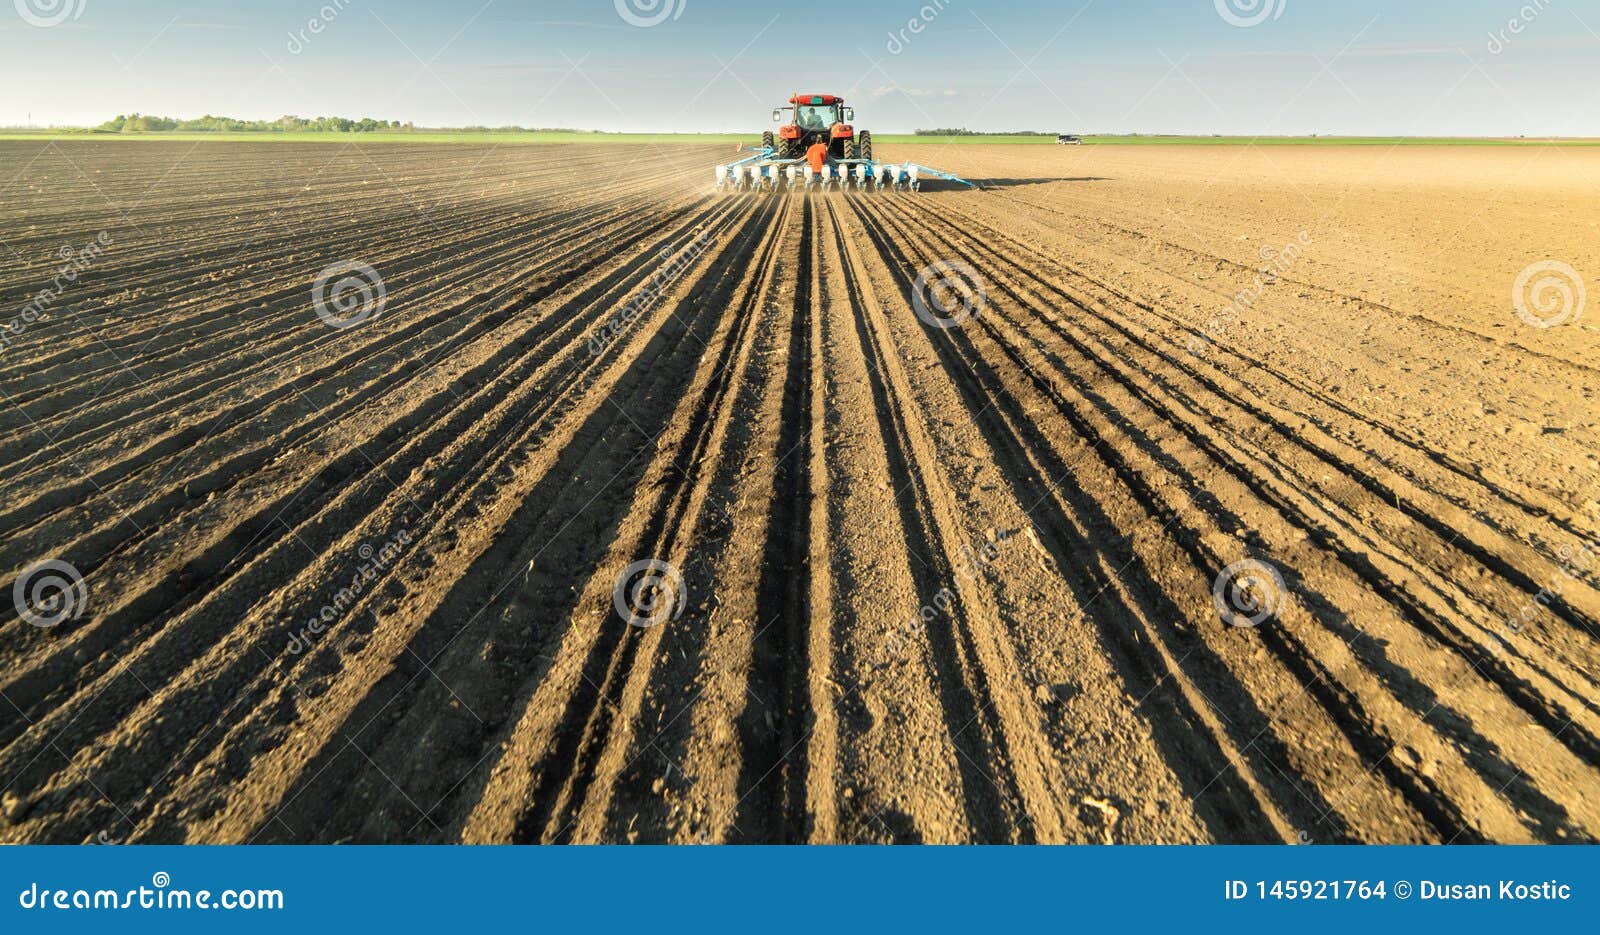 farmer with tractor seeding soy crops at agricultural field